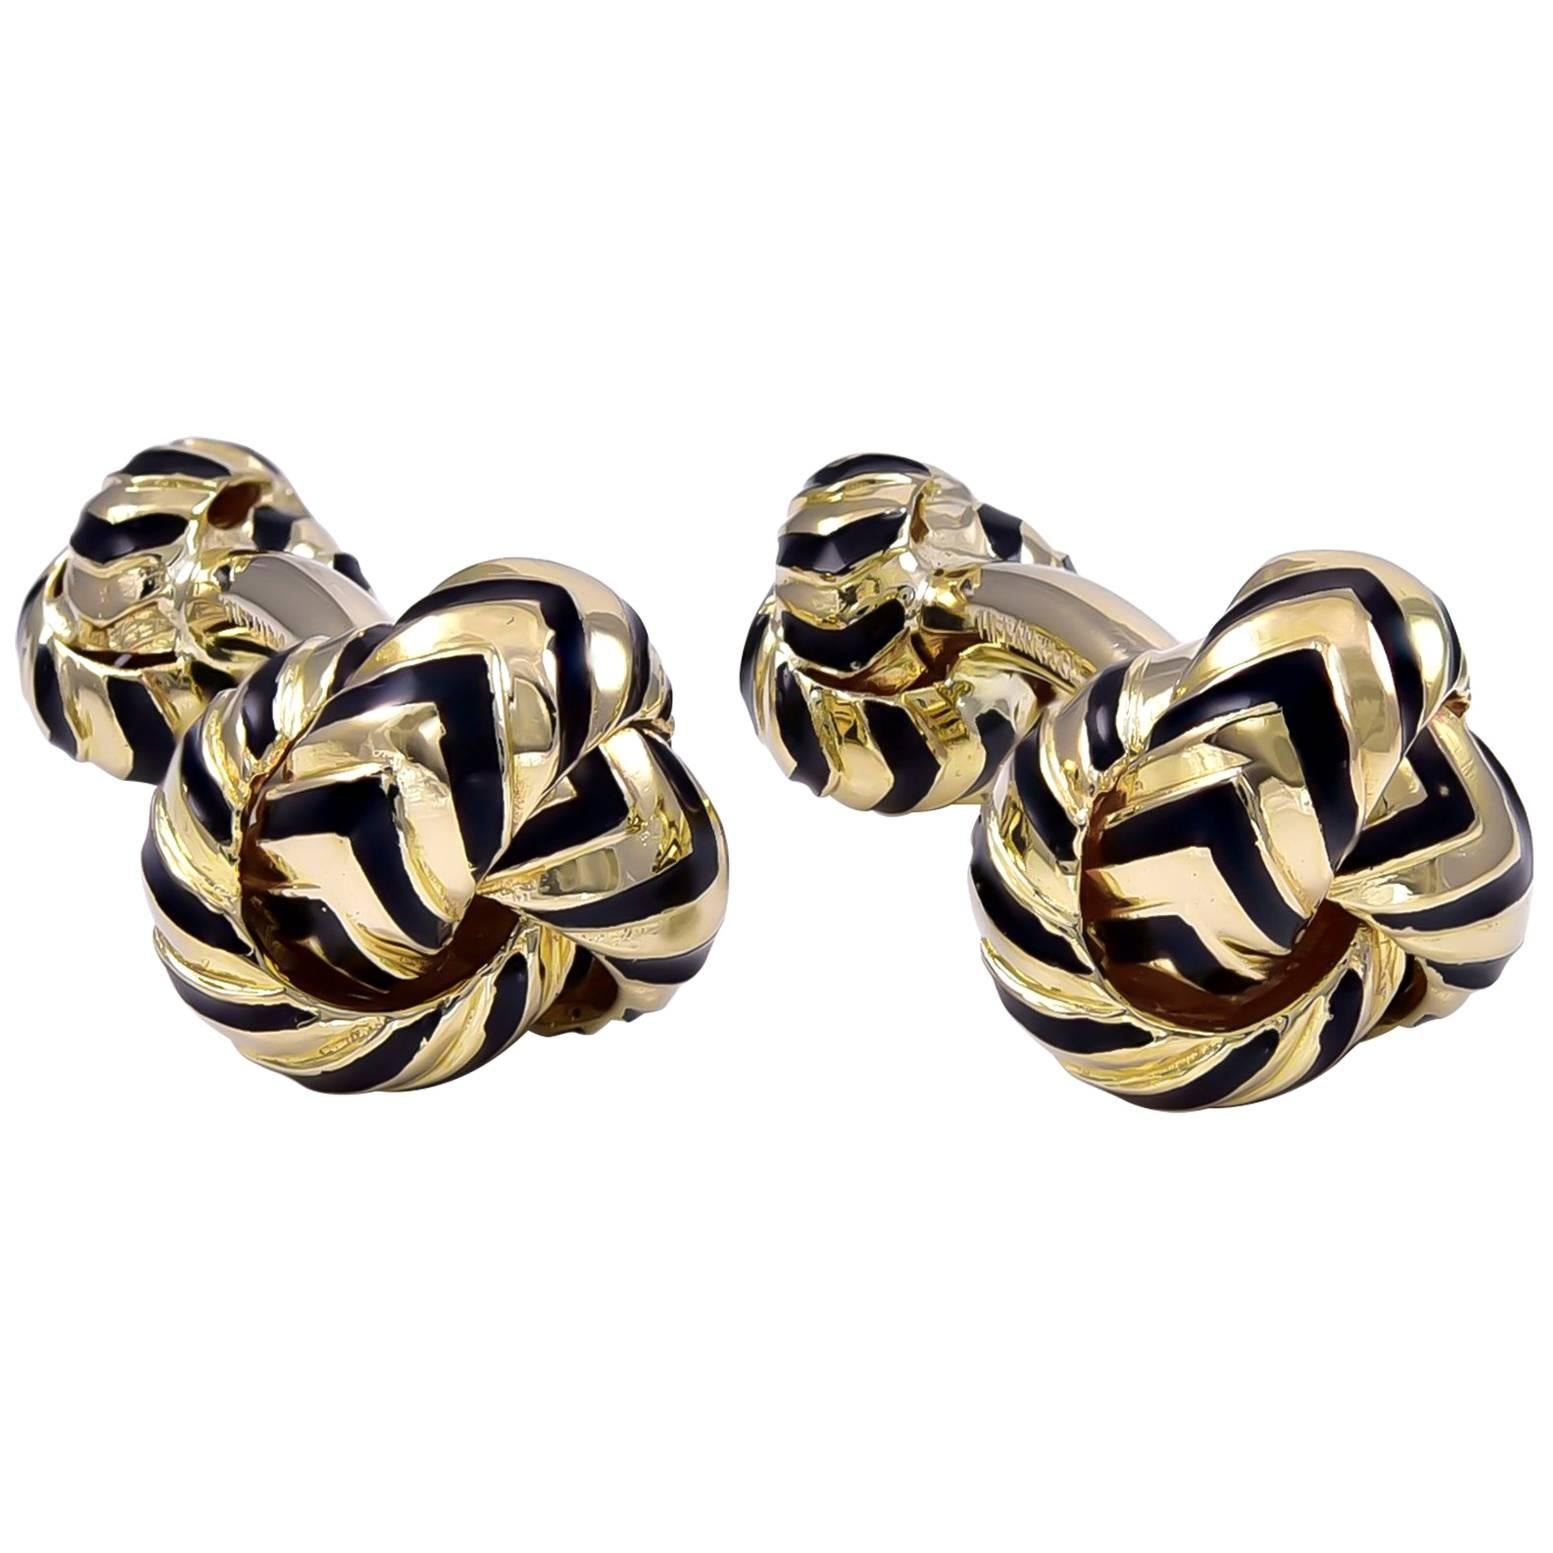 Tiffany & Co. Gold and Enamel Knot Cufflinks For Sale